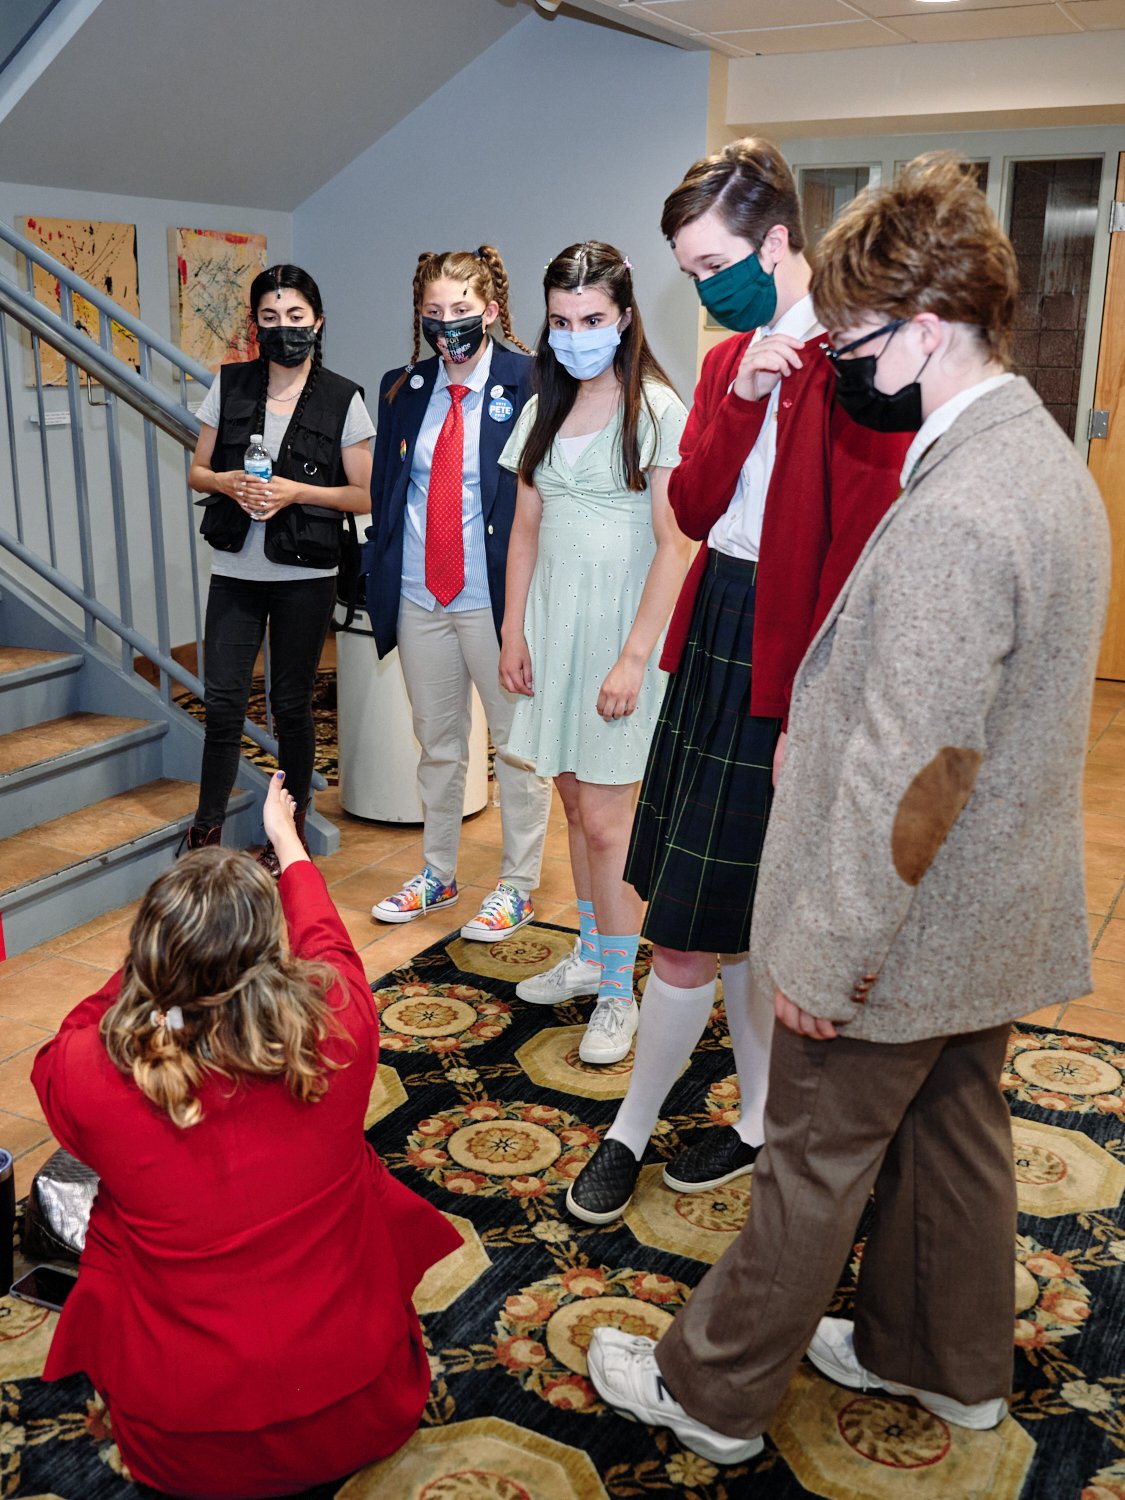  Sewickley Academy High School students are performing the spring musical “The 25th Annual Putnam County Spelling Bee.” The show is staged outdoors in a socially distant format with facial masks on. 